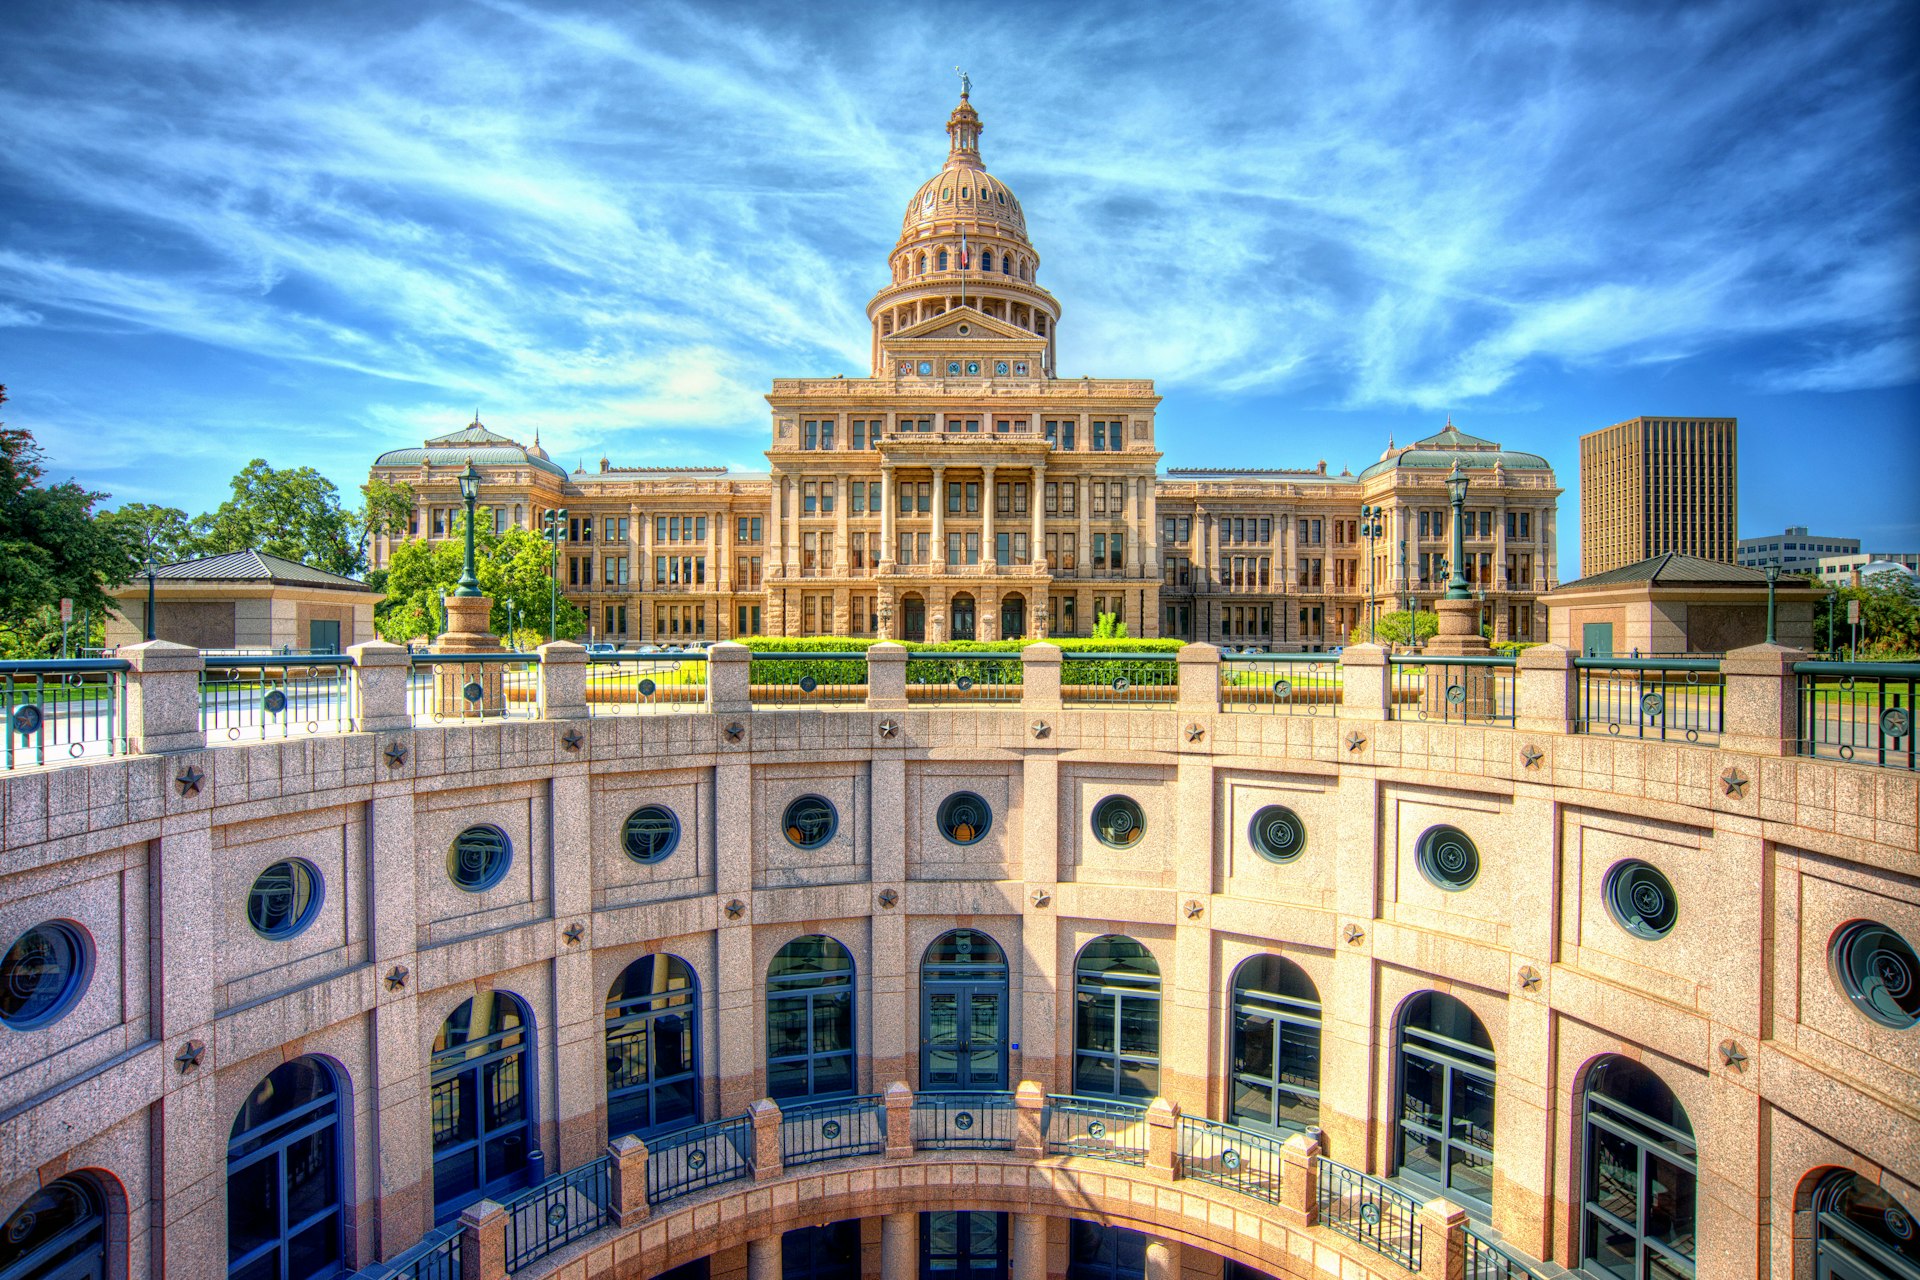 The stunning rotunda of the Texas State Capitol with the main building in the background